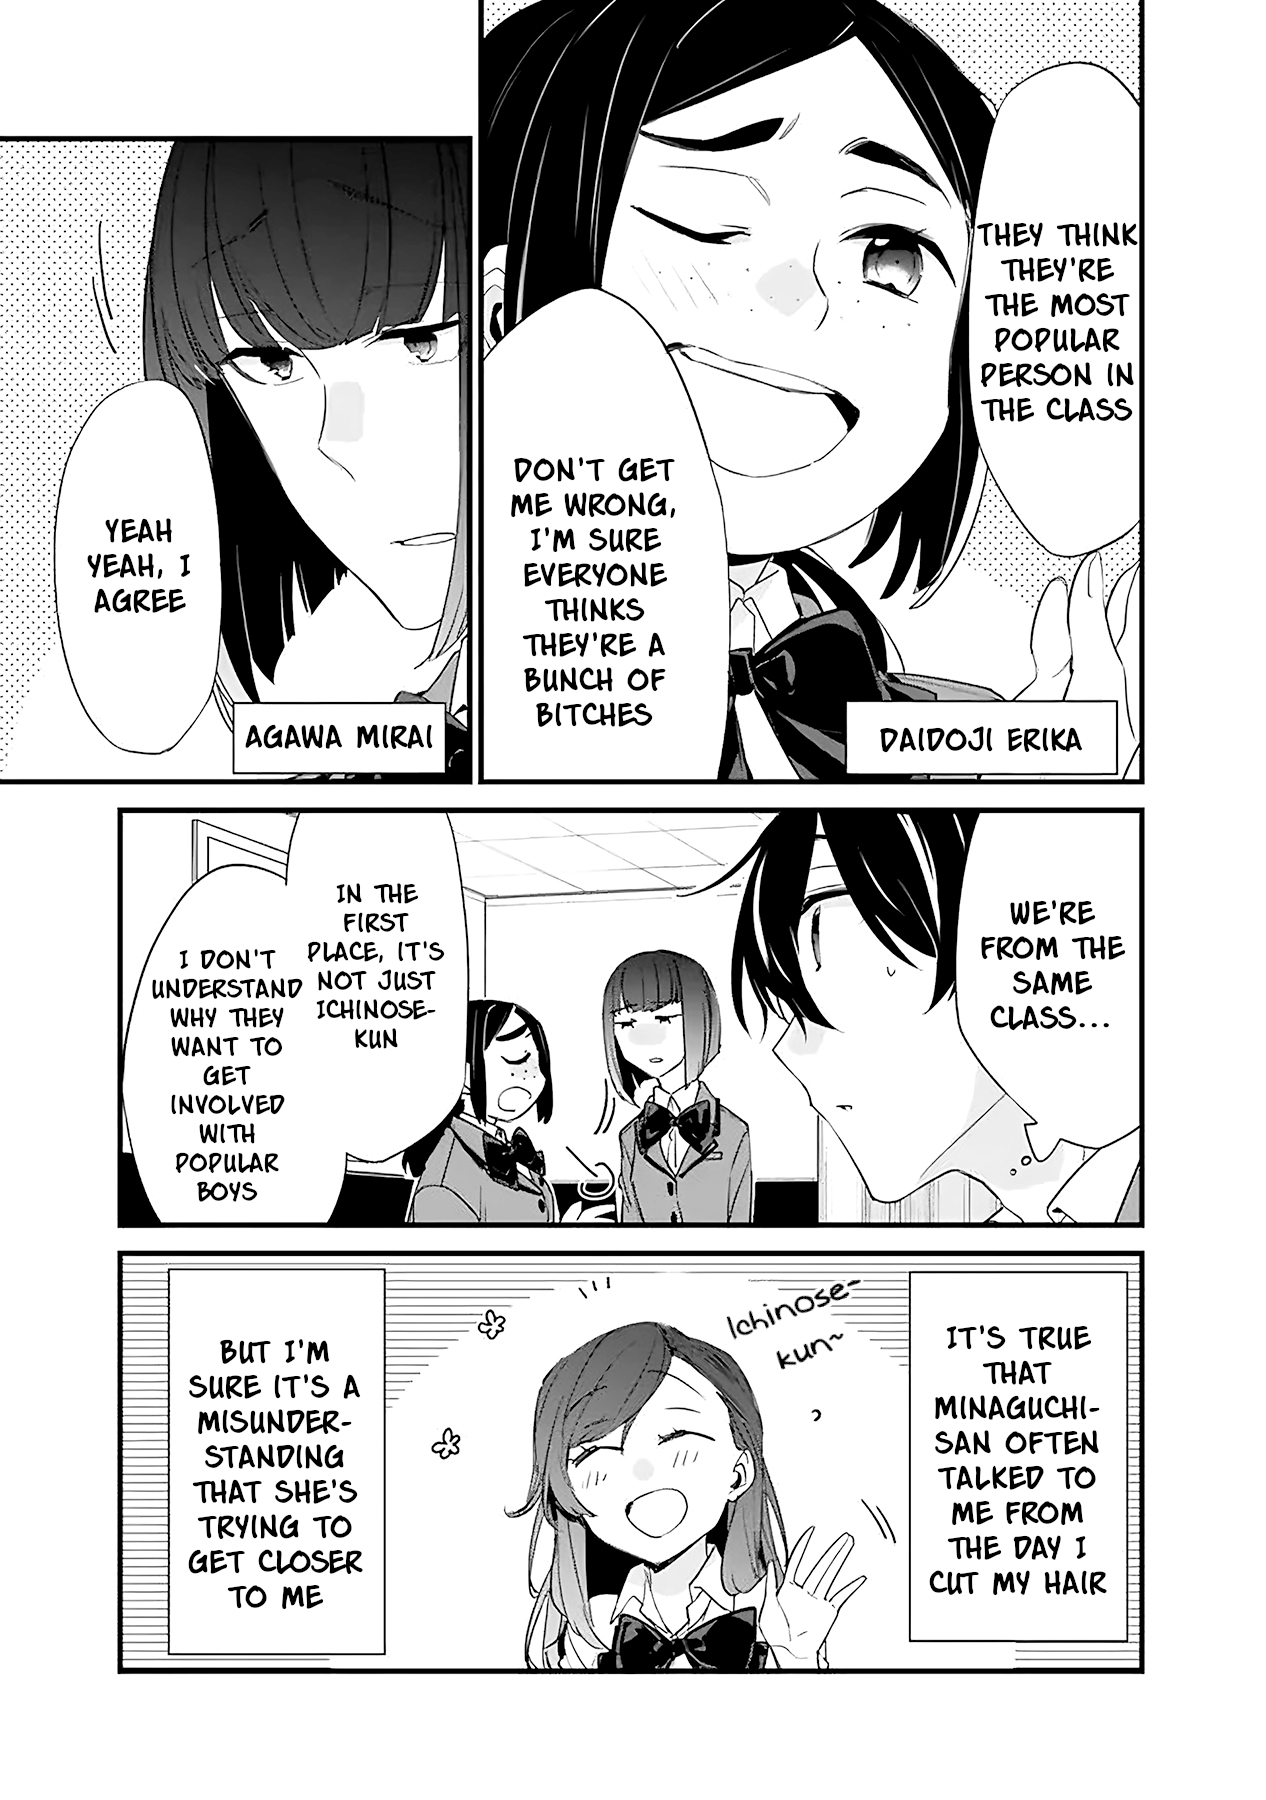 I’M Sick And Tired Of My Childhood Friend’S, Now Girlfriend’S, Constant Abuse So I Broke Up With Her - Page 5